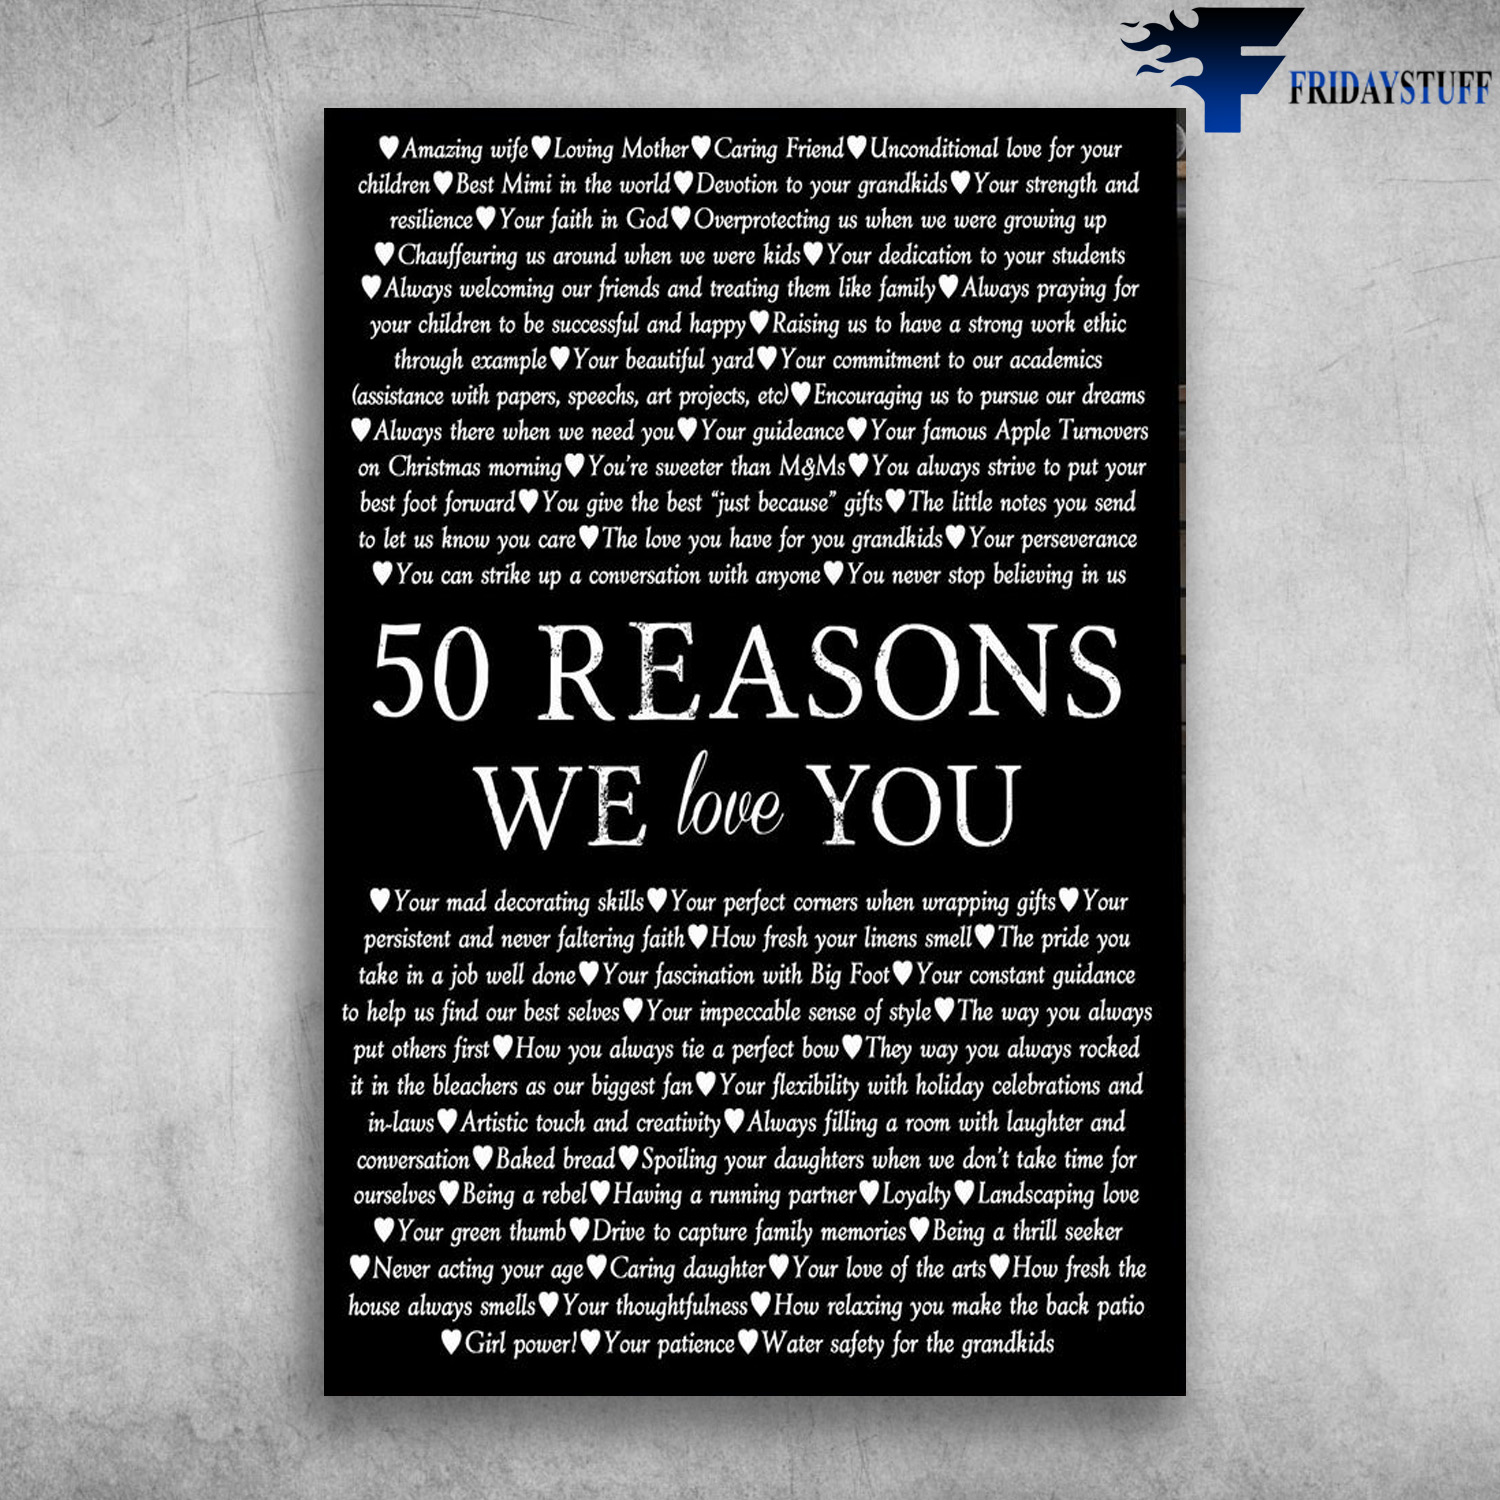 50 Reasons We Love You - Amazing Wife, Loving Mother, Caring